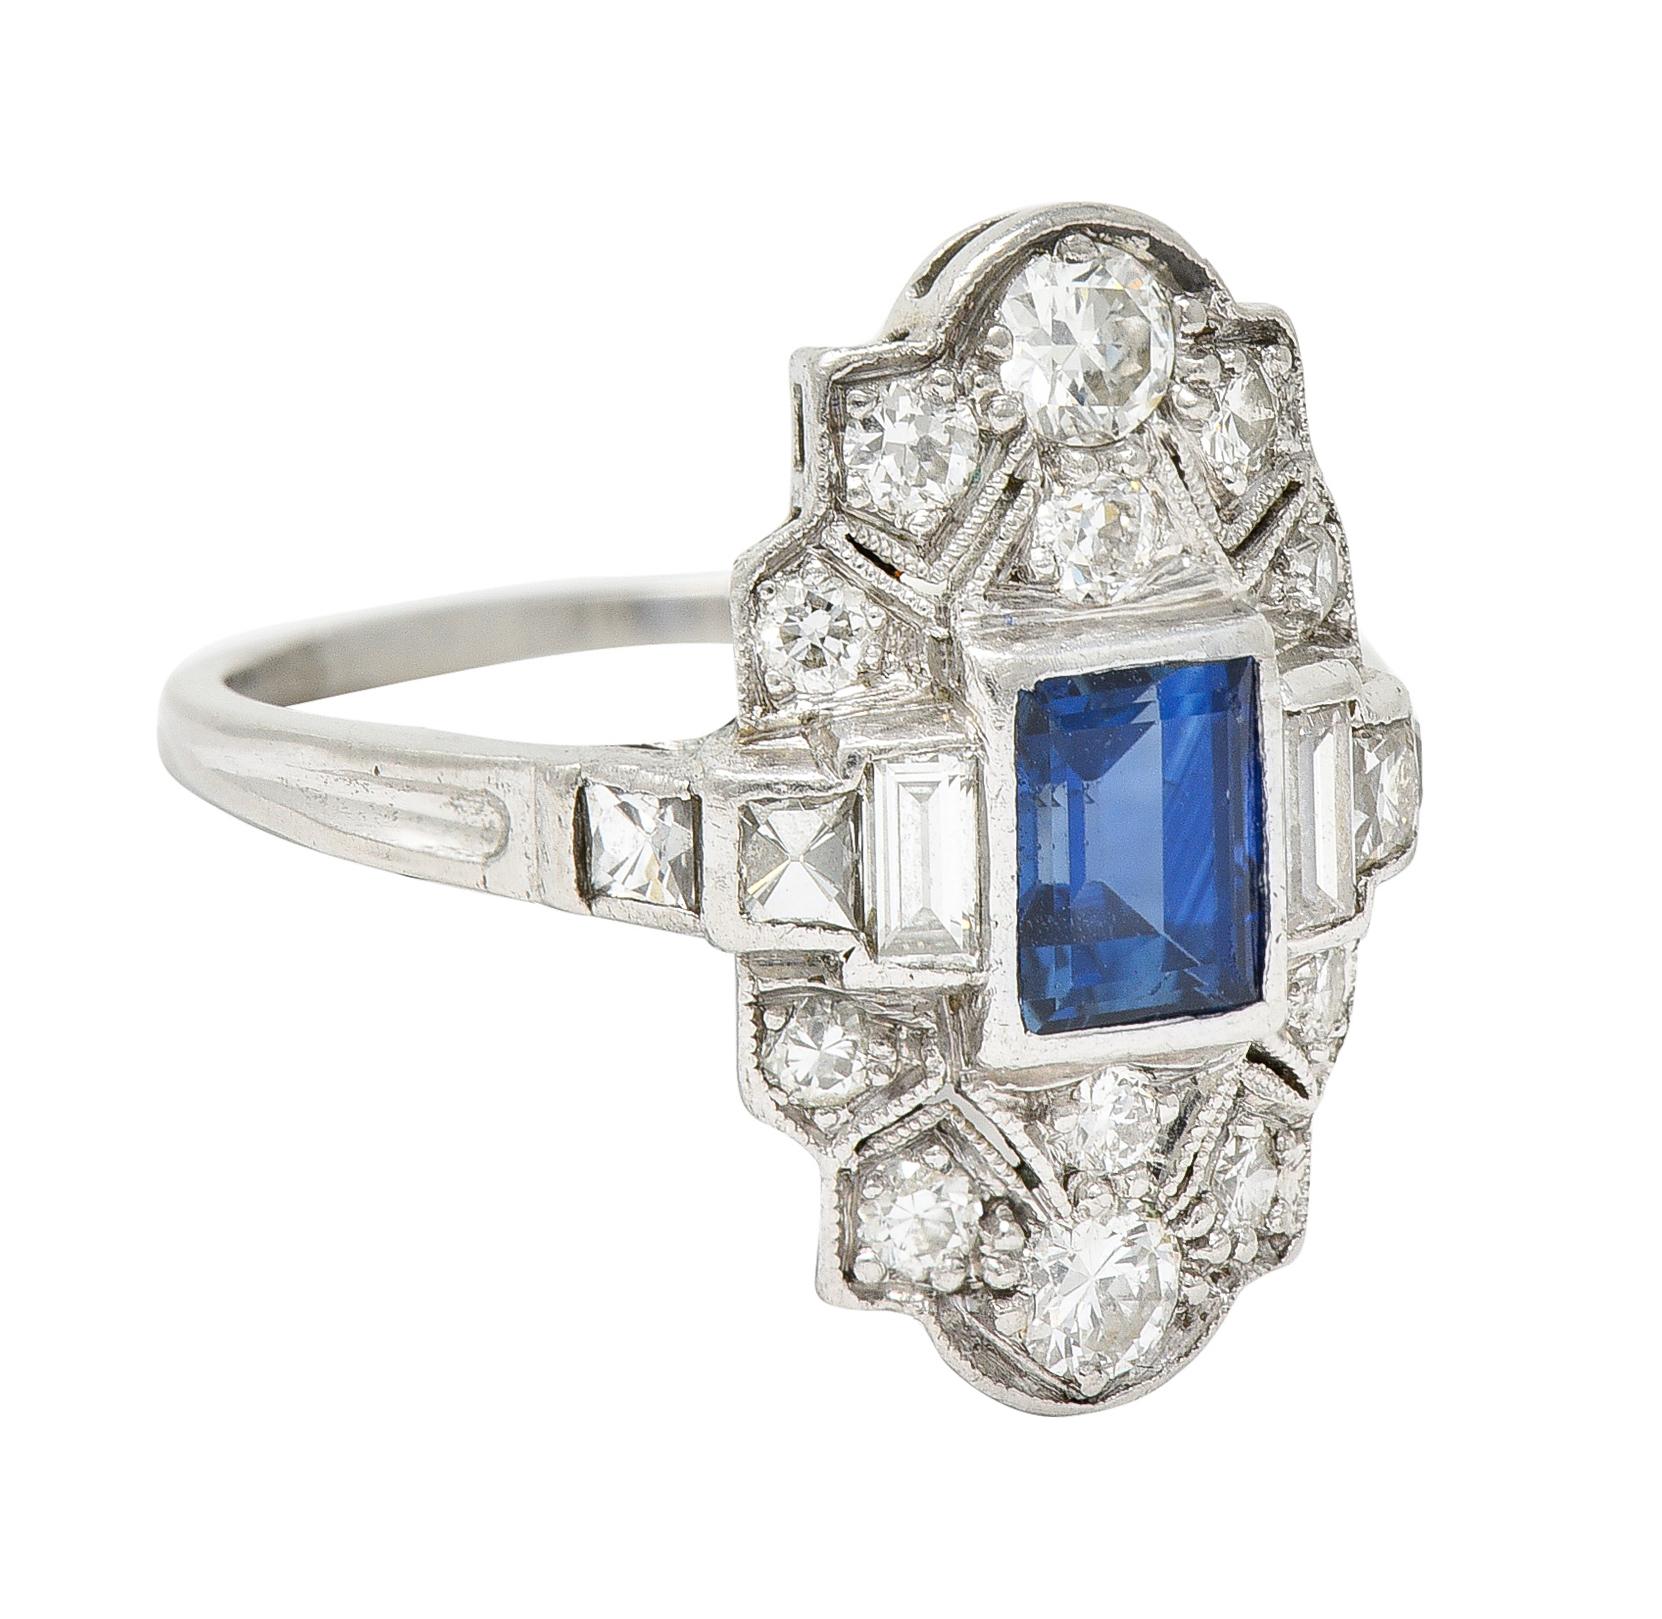 Dinner ring features a bezel set rectangular cut sapphire

Weighing approximately 0.95 carat with vivid and uniform royal blue color

Flanked by tiered shoulders - flushly set with French and baguette cut diamonds

Accompanied by stylized geometric